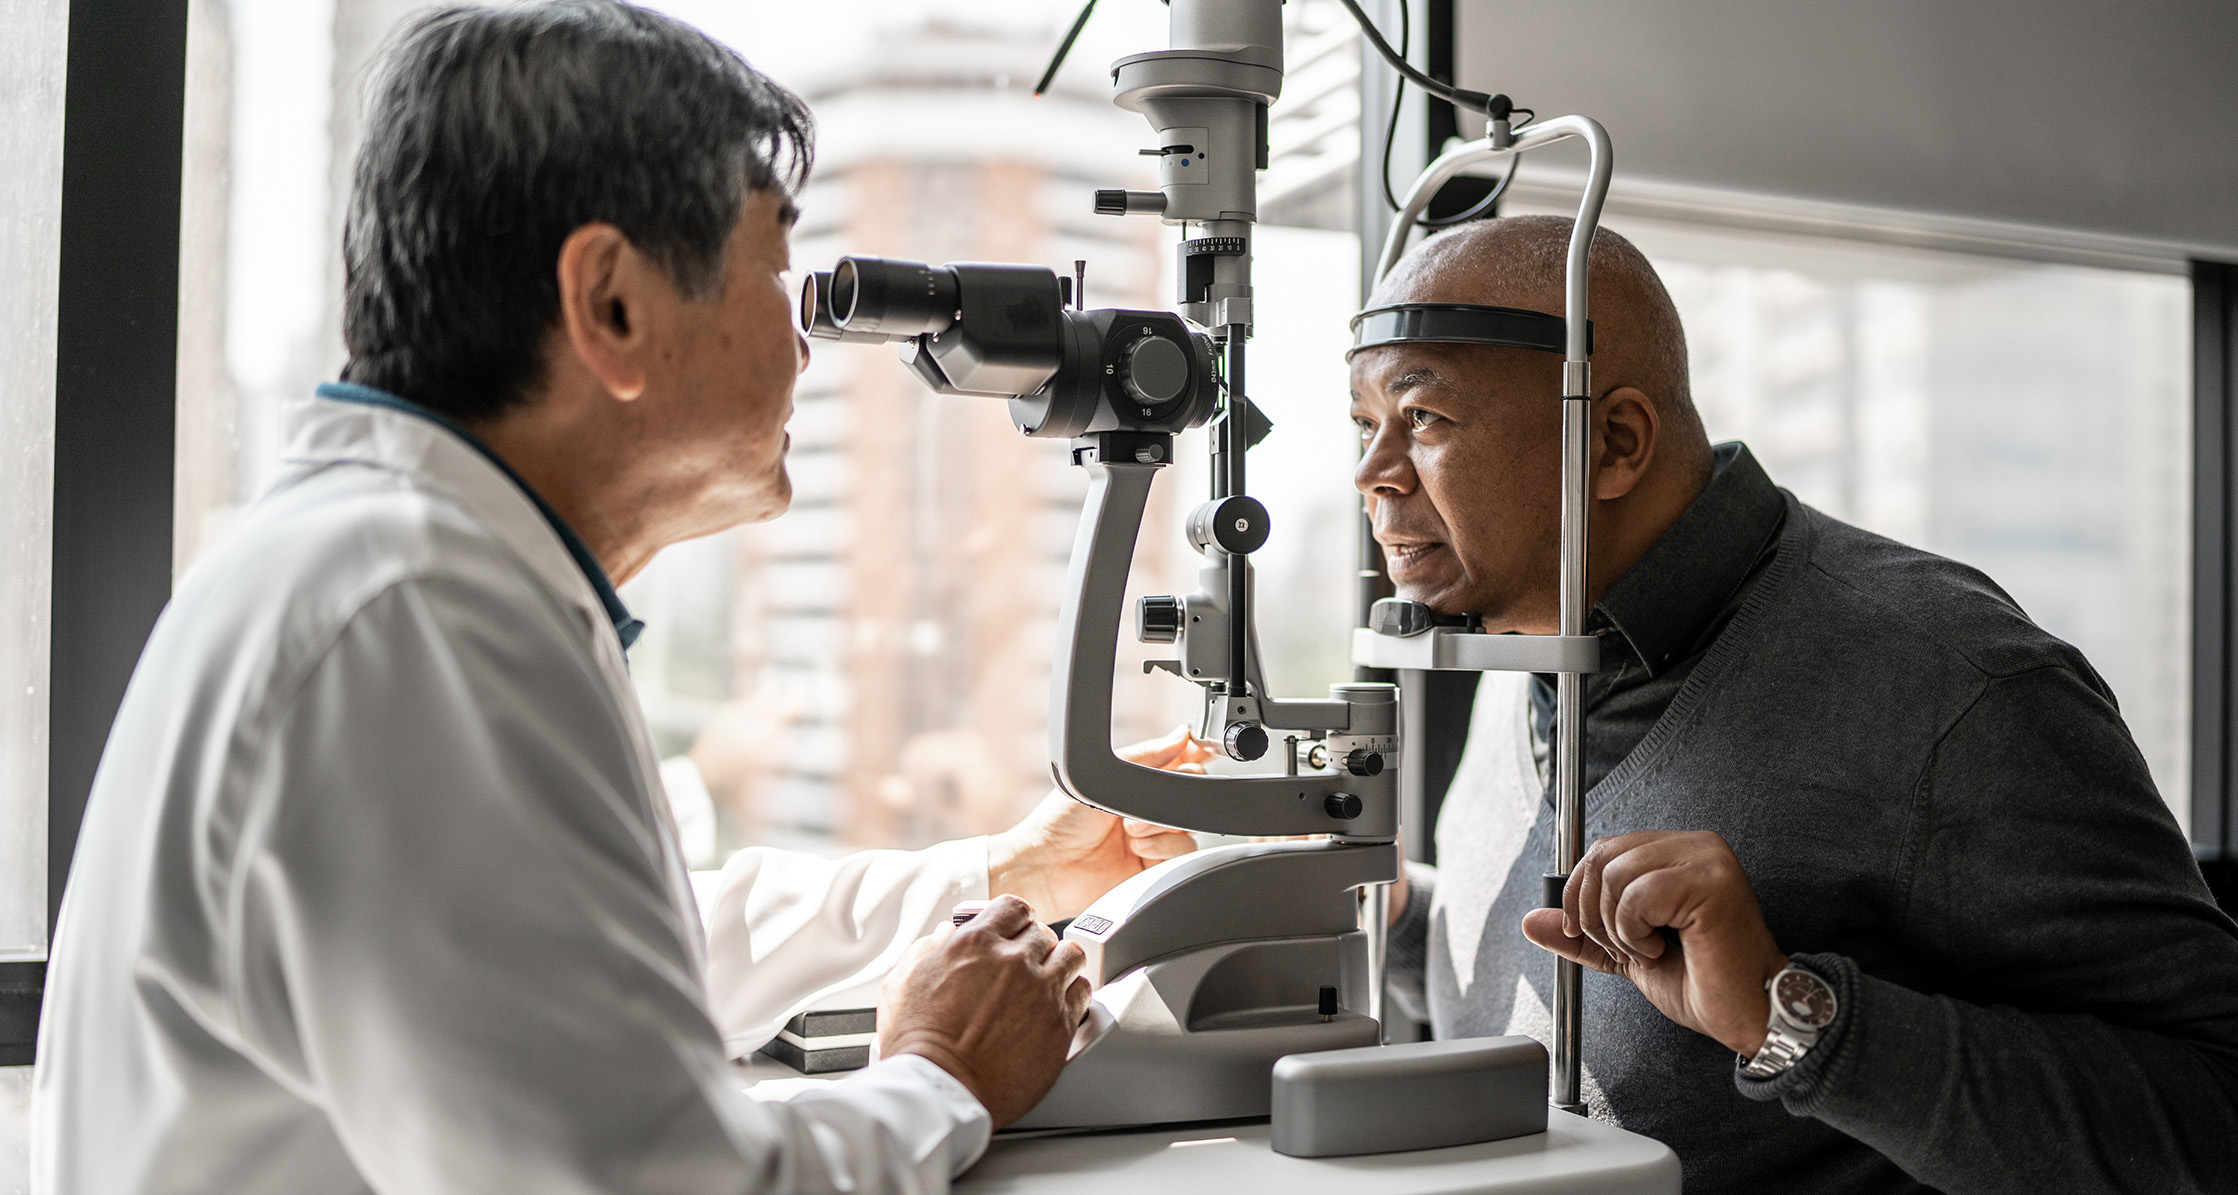 Ophthalmologist examining patient’s eyes.